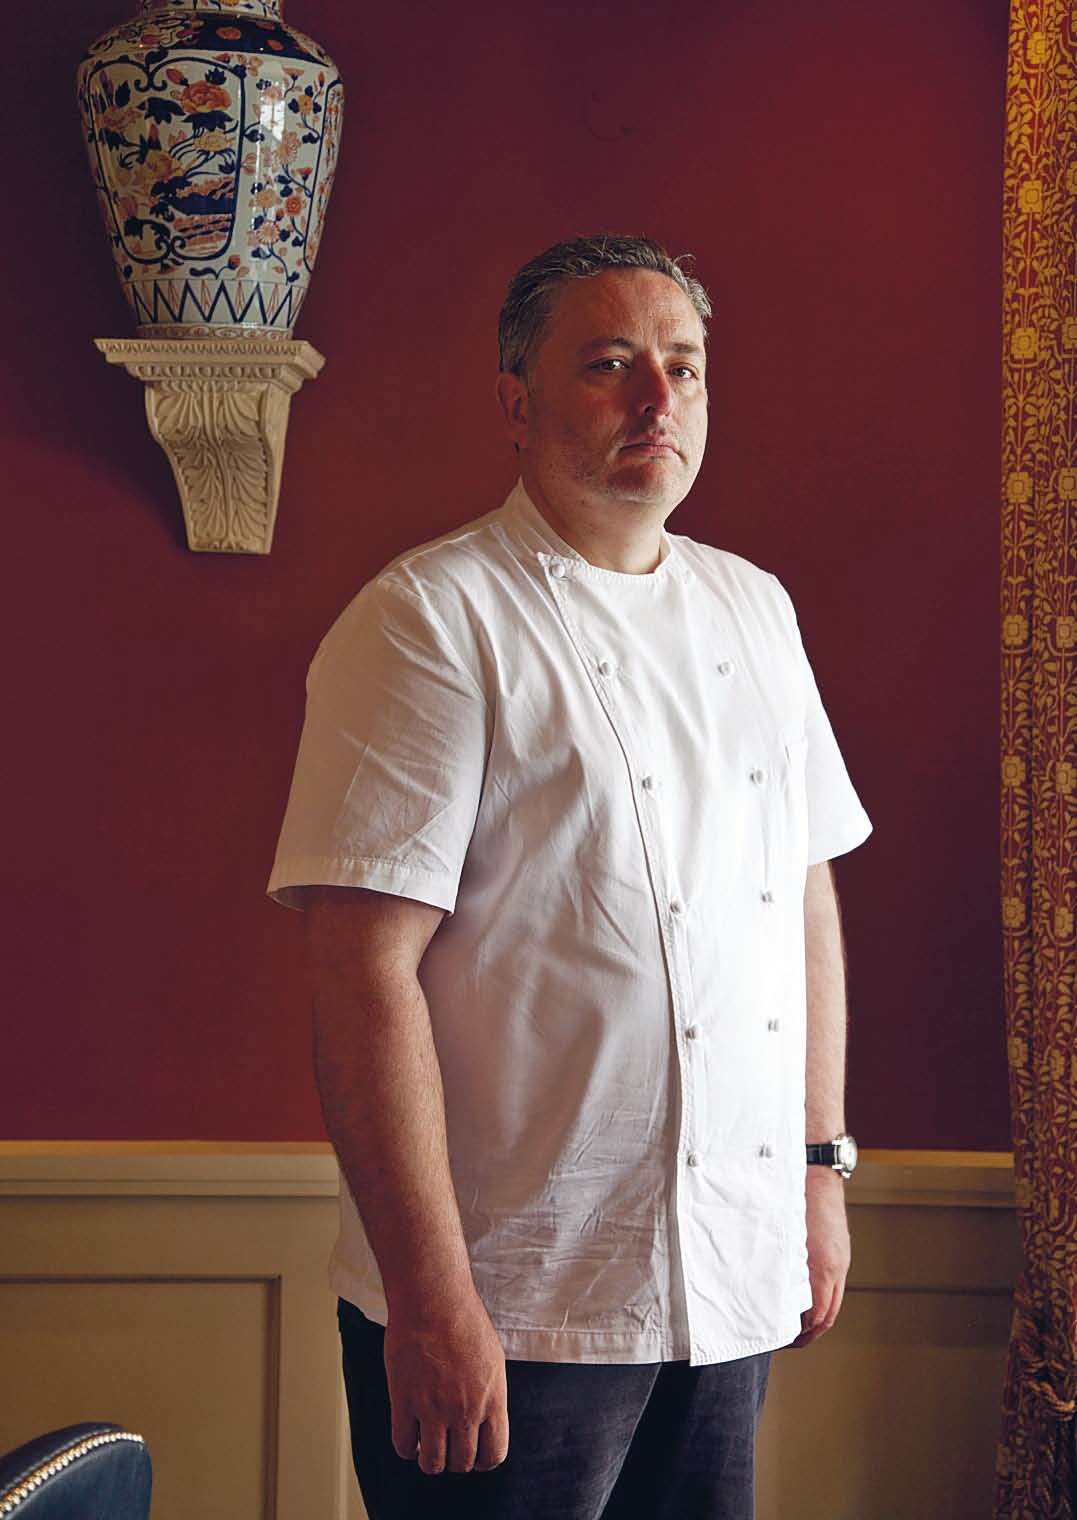 Richard Corrigan is chef and owner of Bentley’s Sea Grill at Harrods, London SW1